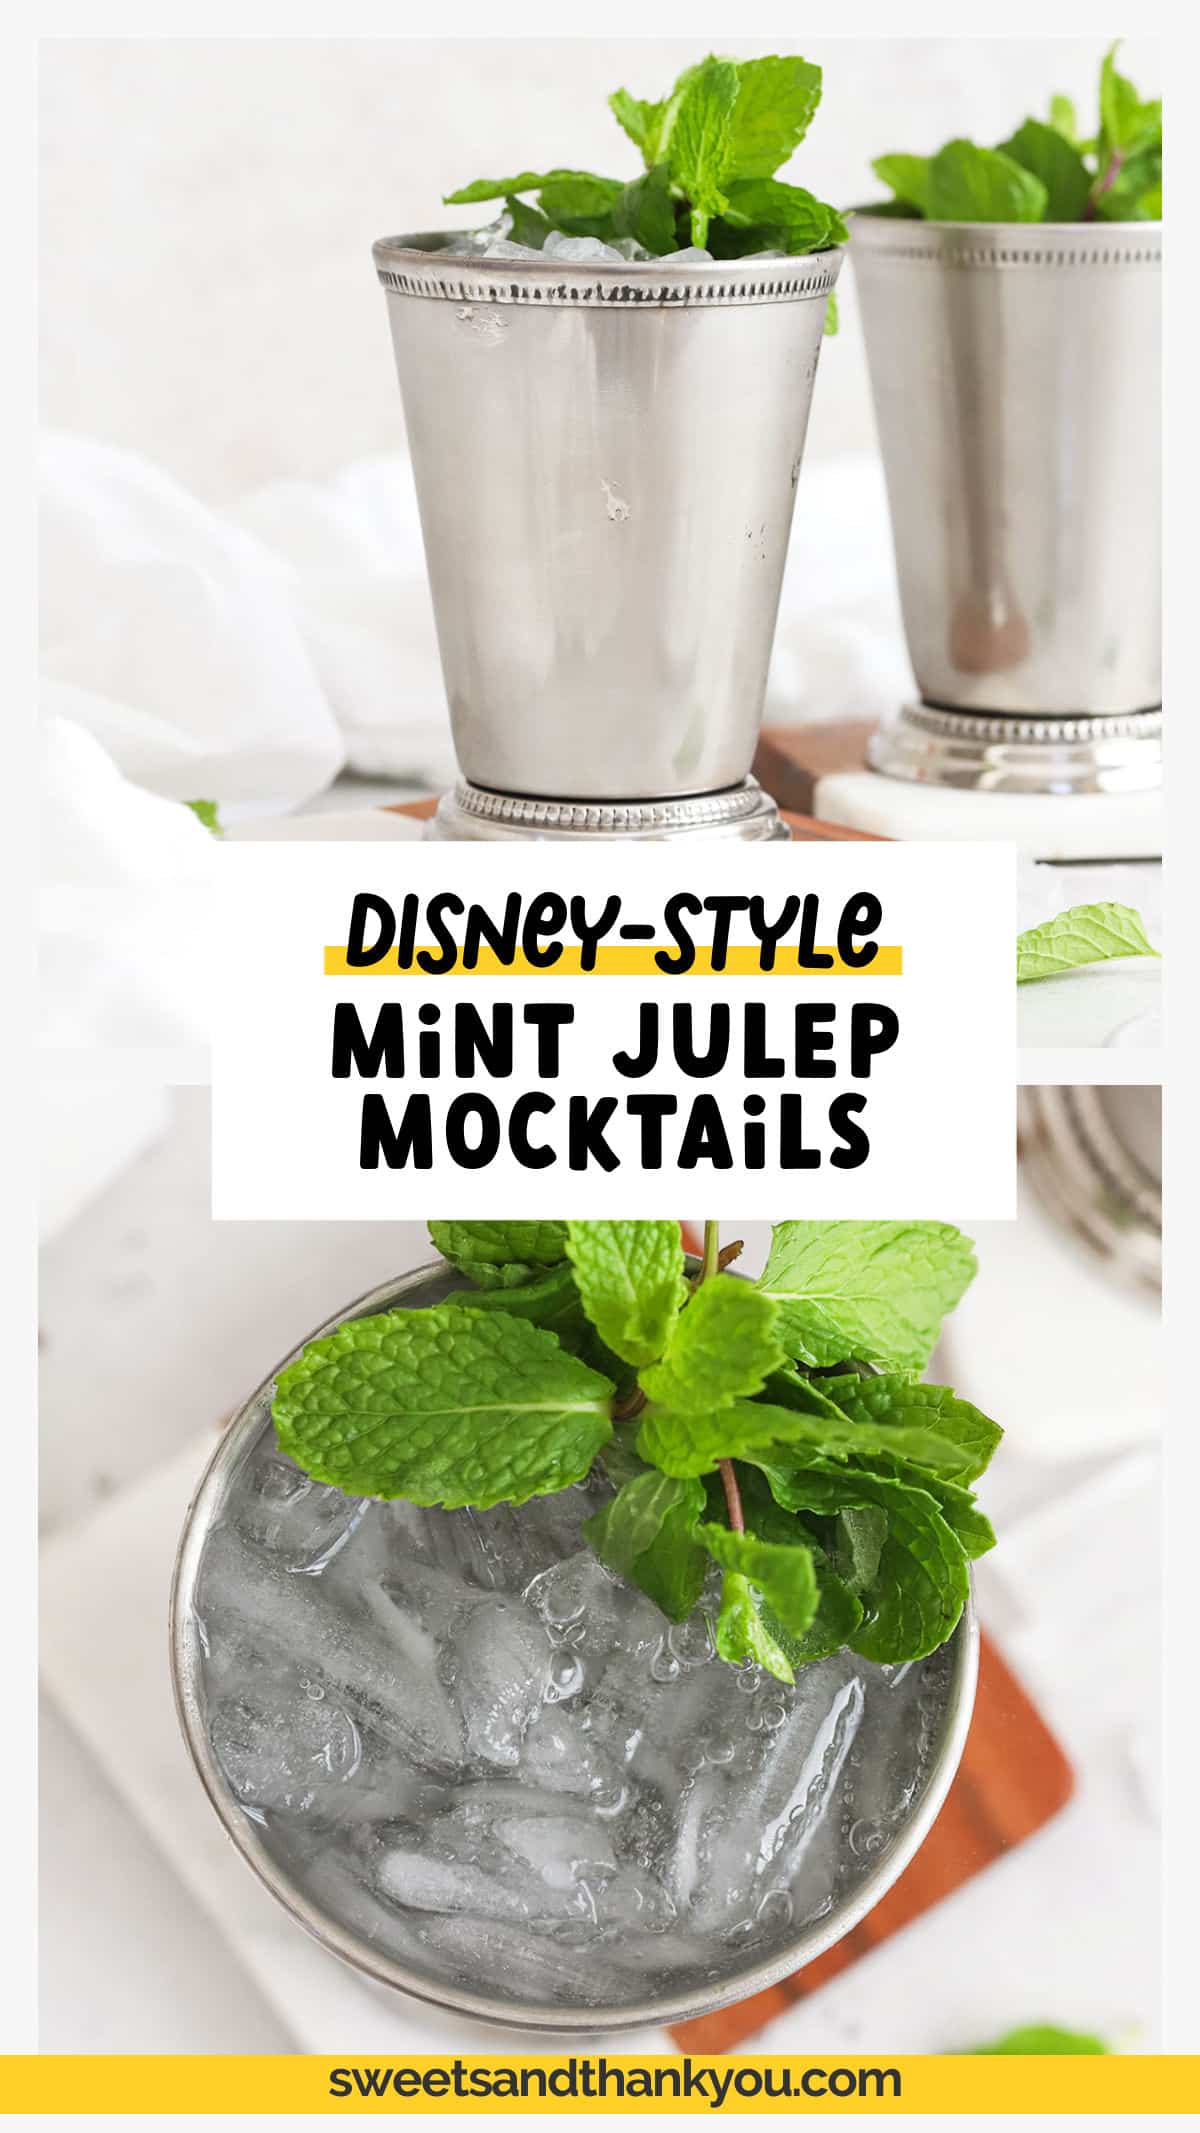 Craving a virgin mint julep for Derby day? We've got you covered with our easy Disneyland mint julep mocktail recipe! If you've been looking for a disneyland copycat mint julep recipe, your search stops here! We make this mint julep mocktail with simple ingredients like mint simple syrup, fresh mint, lemonade, and lemon-lime soda. The flavors are bright and refreshing--a perfect summer mocktail! Get the recipe & yummy variations to try at sweetsandthankyou.com